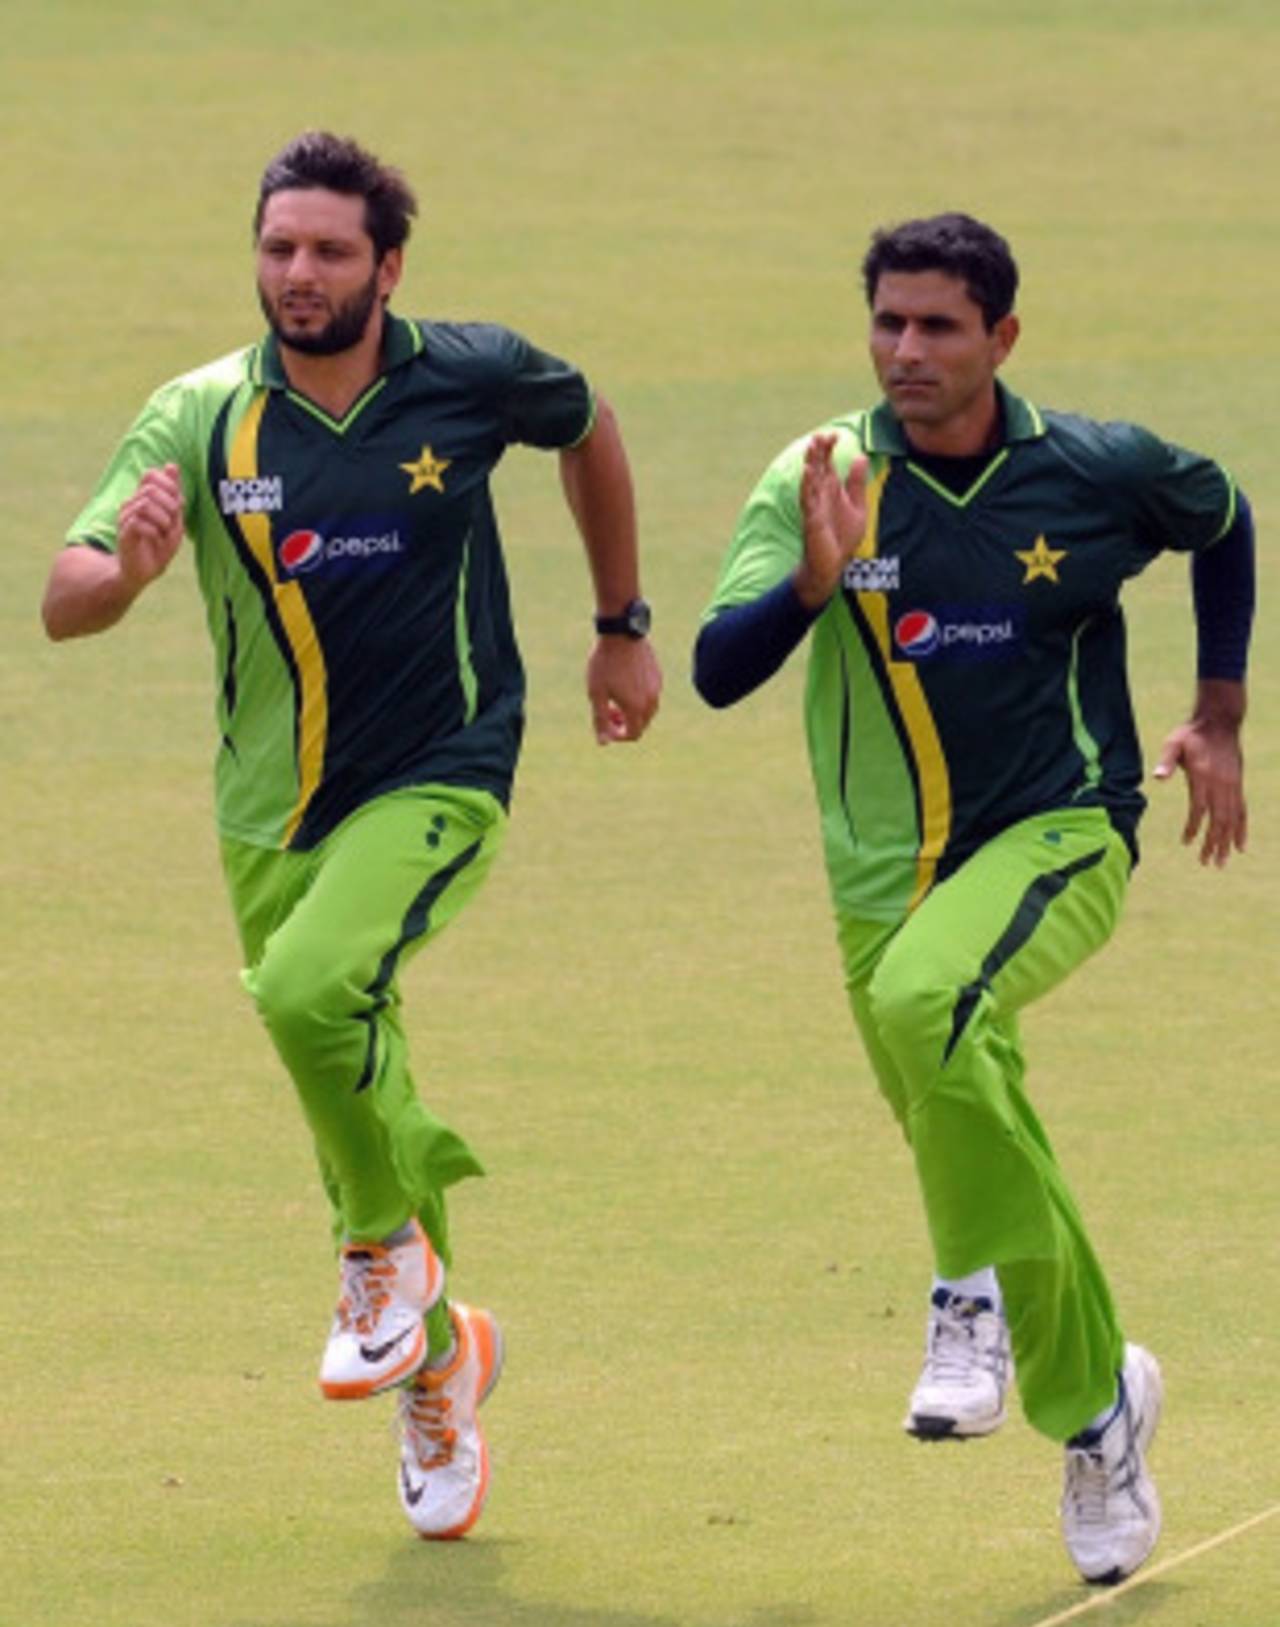 Shahid Afridi and Abdul Razzaq sprint during a warm-up session, Mohali, March 28, 2011